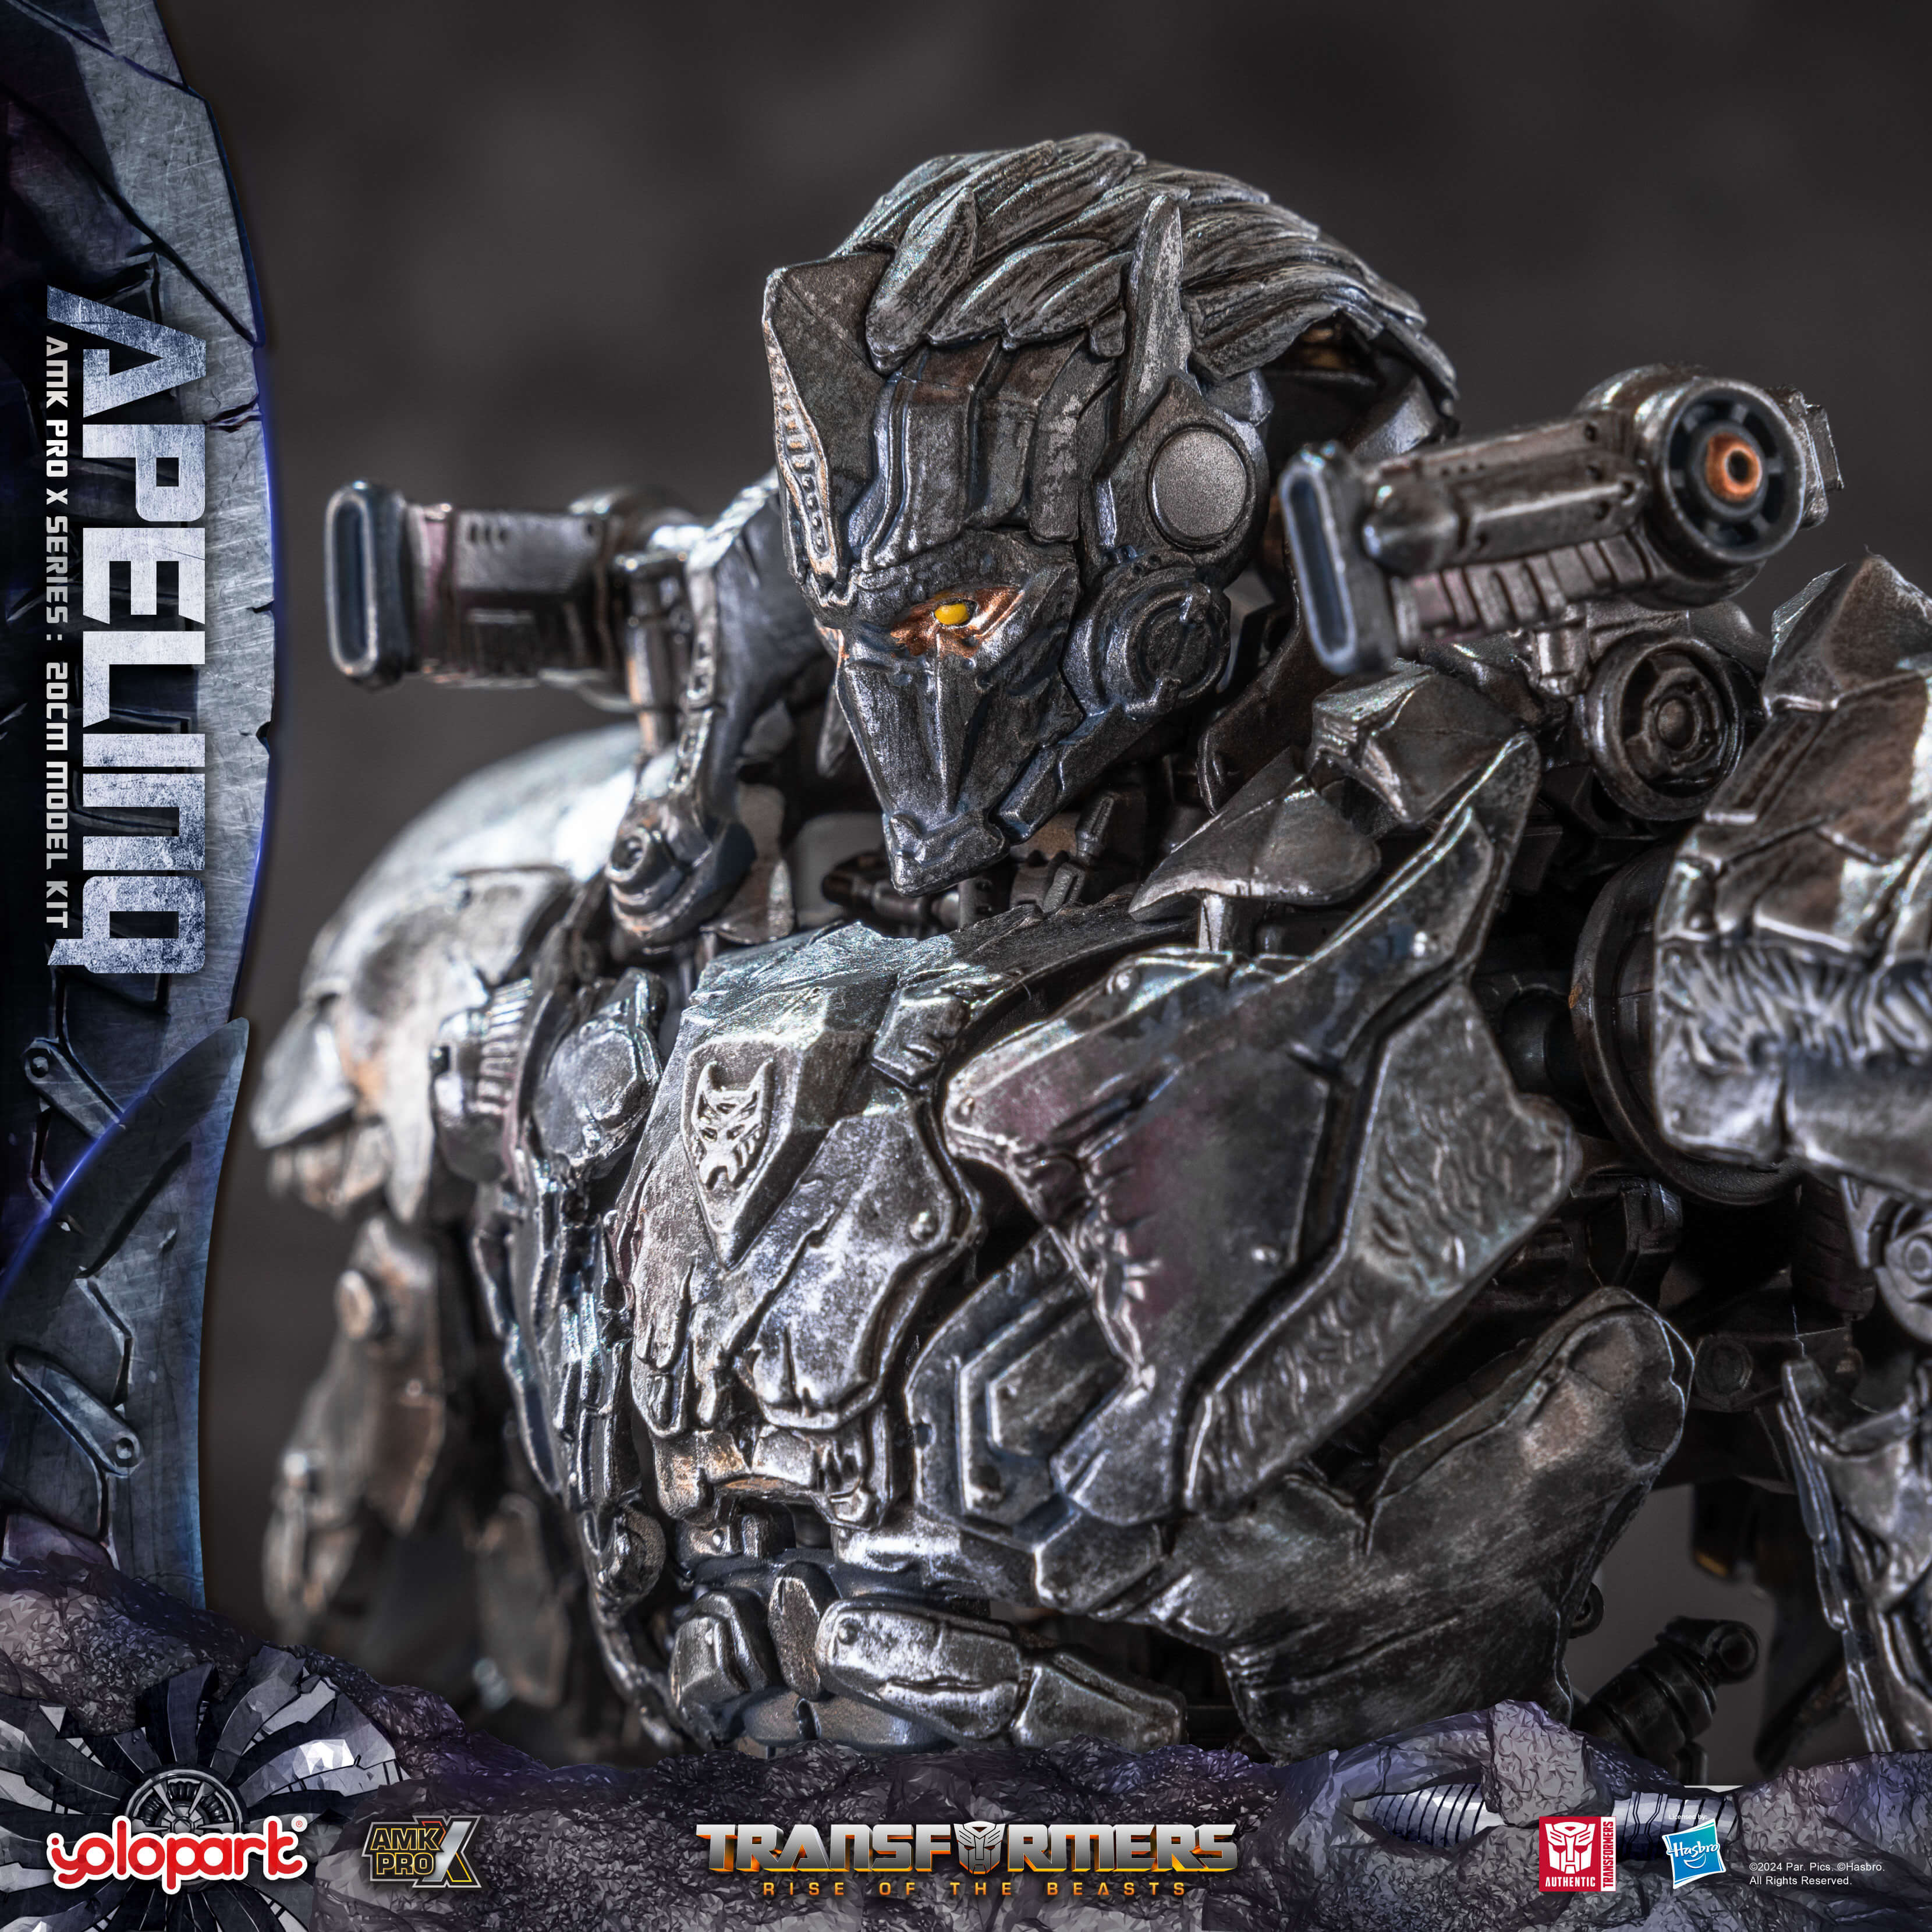 [PRE-ORDER] AMK PRO X Series Transformers Movie 7: Rise of The Beasts - 20cm Apelinq Model Kit